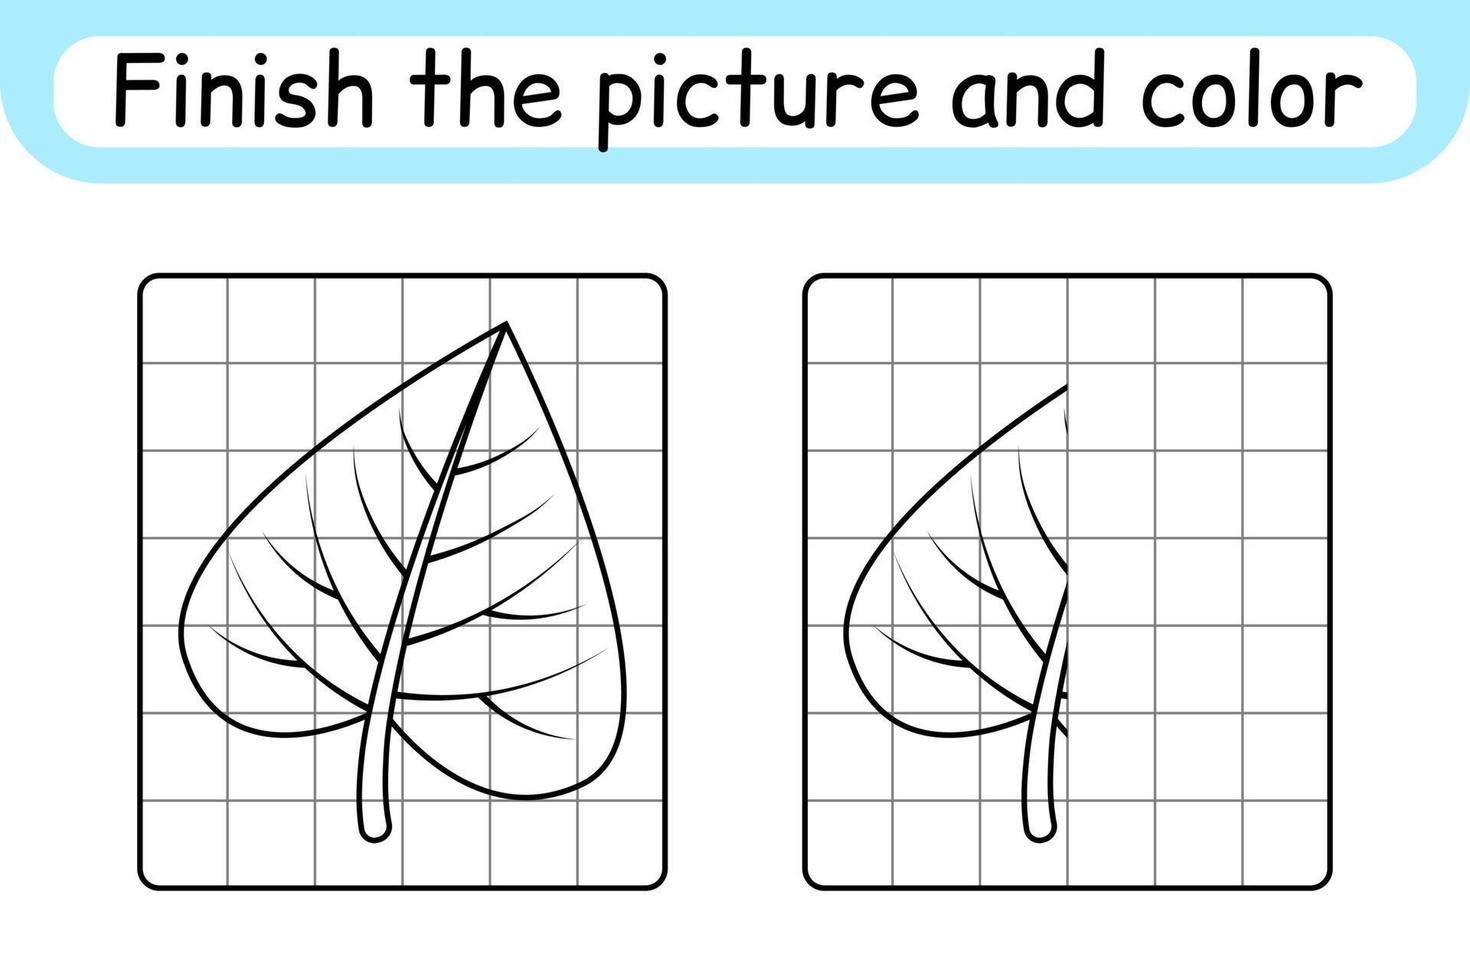 Complete the picture leaf birch. Copy the picture and color. Finish the image. Coloring book. Educational drawing exercise game for children vector